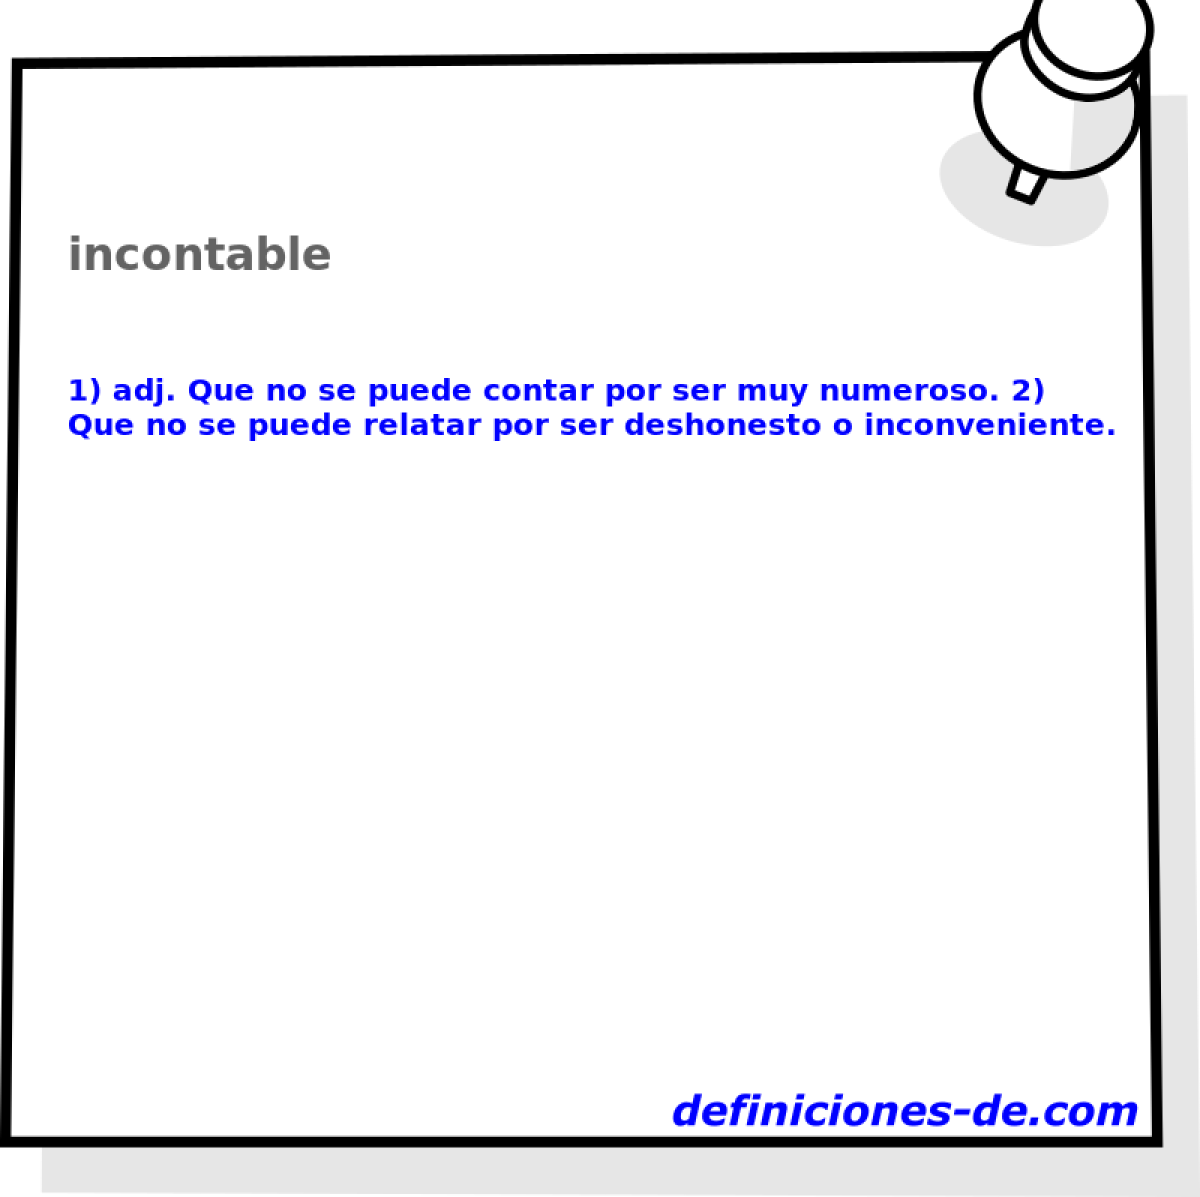 incontable 